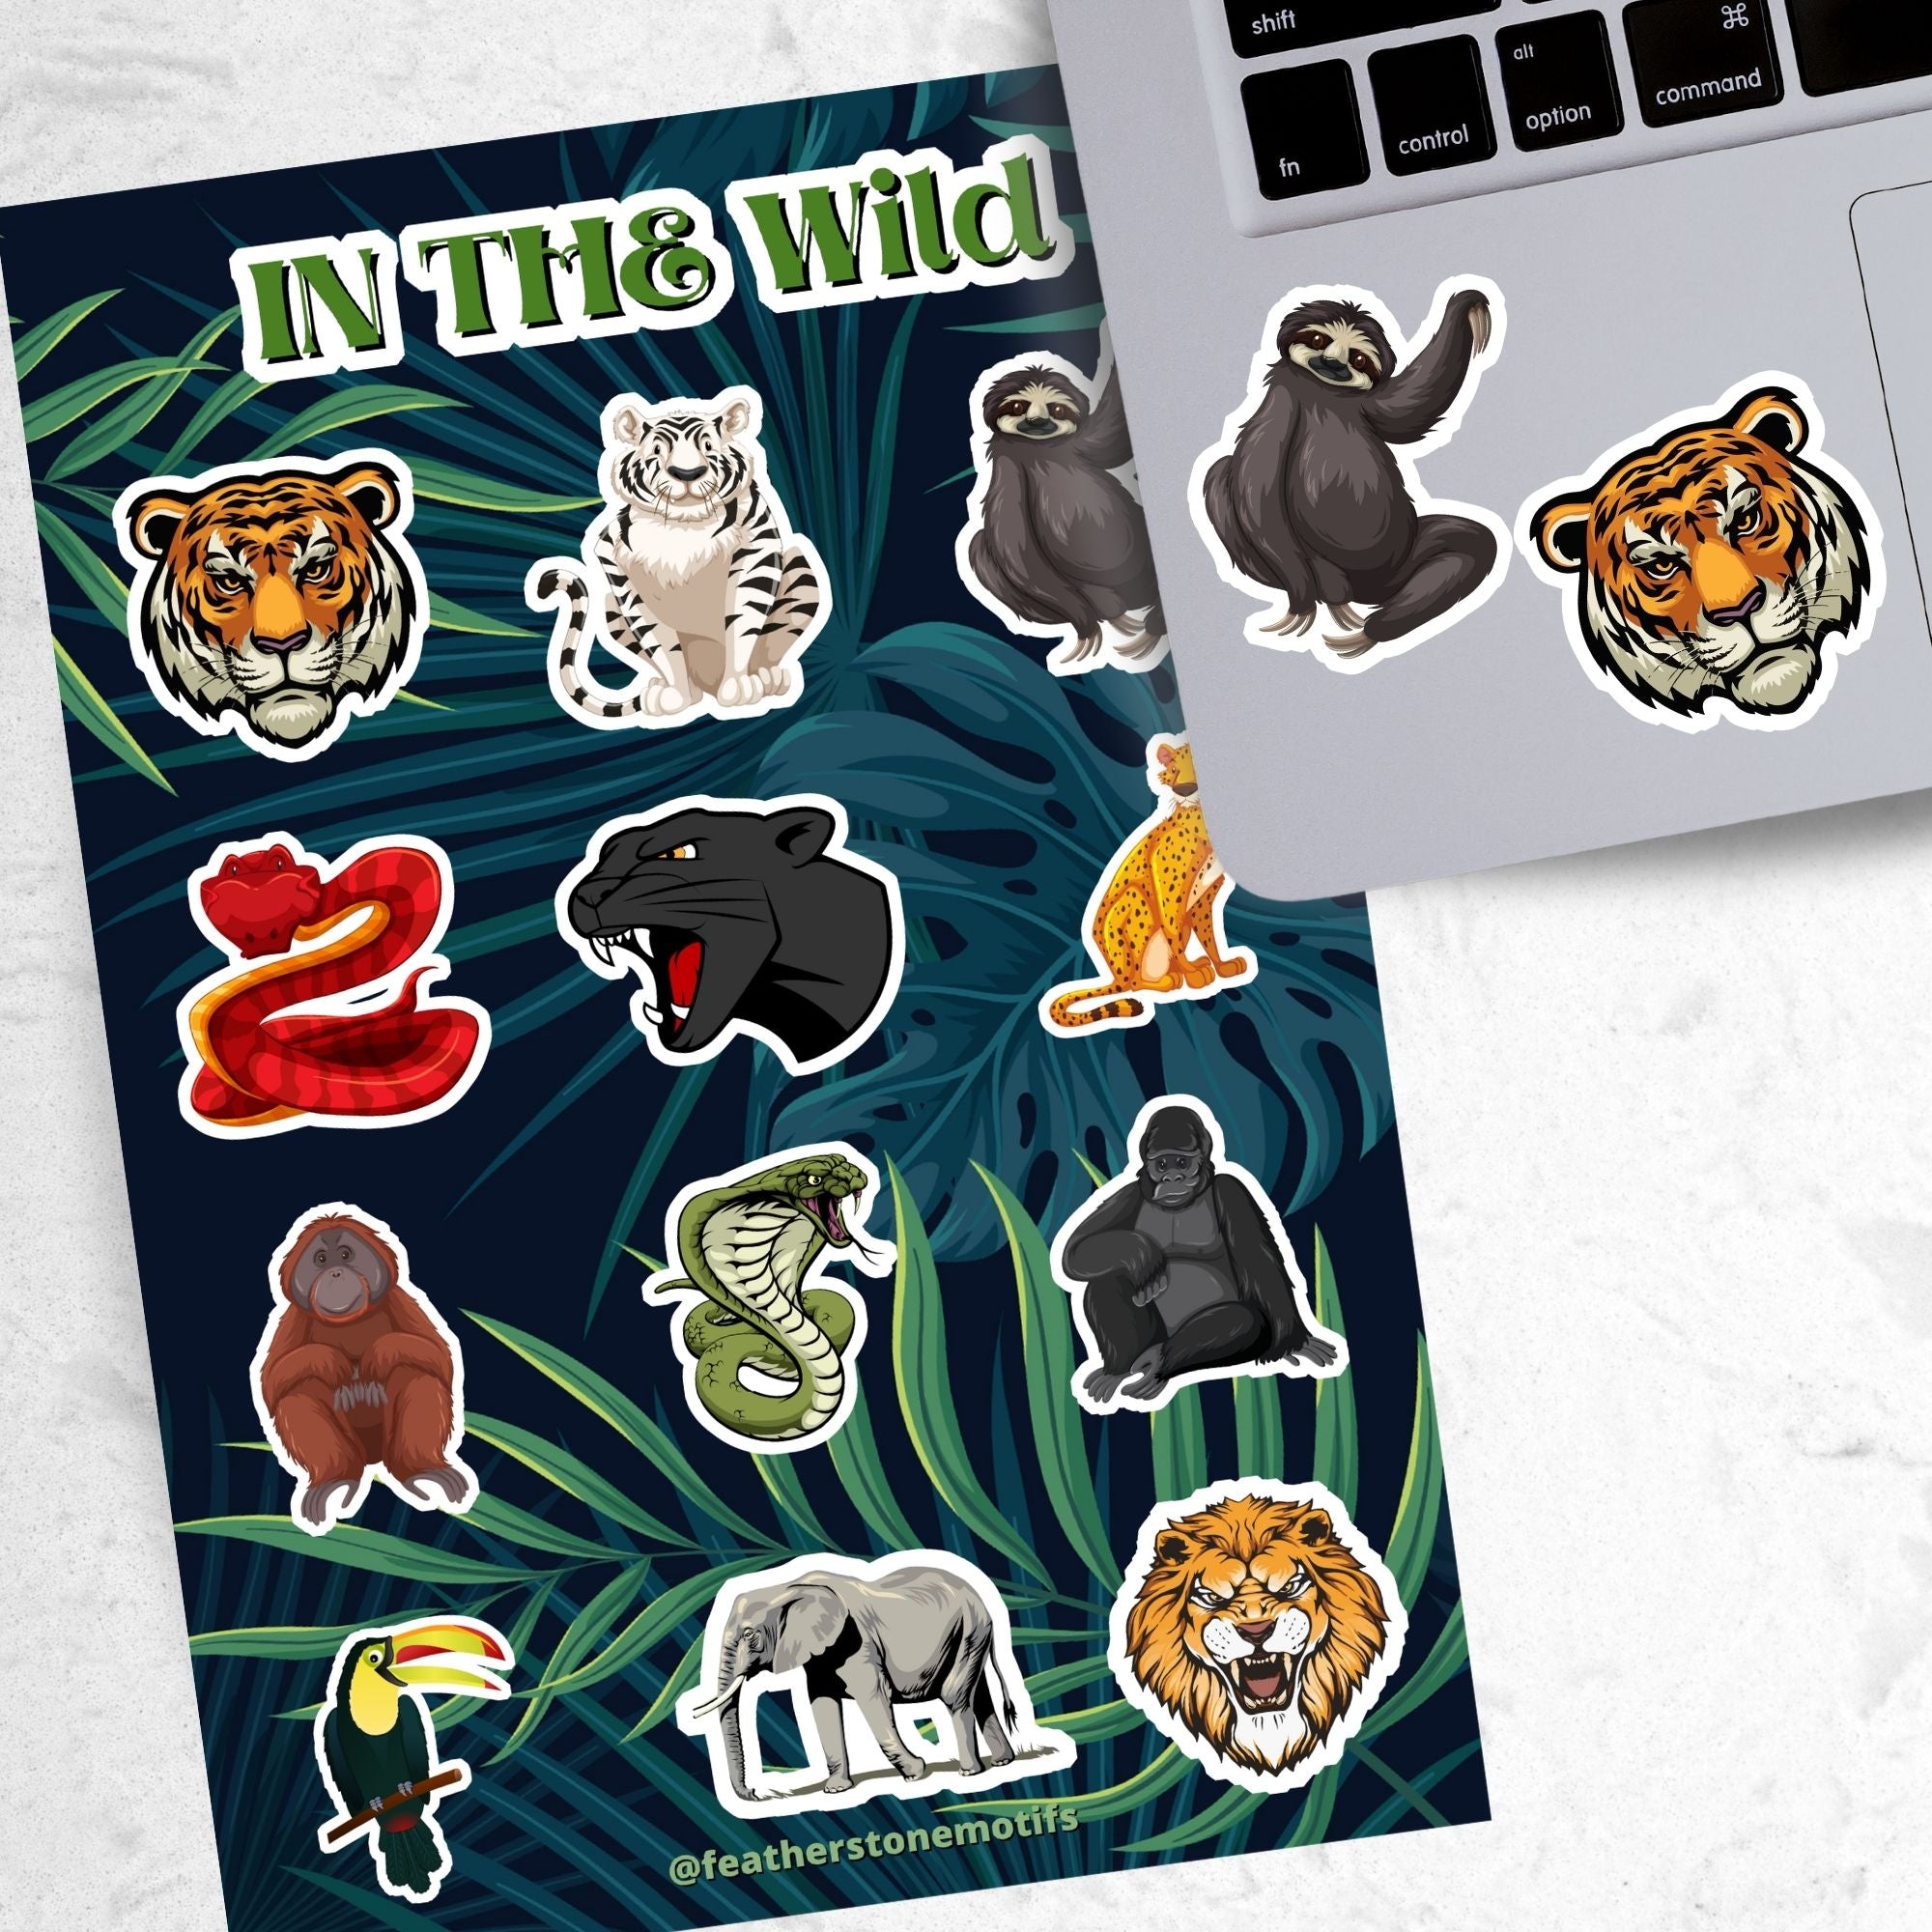 This sticker sheet has sticker images of your favorite jungle and rain forest creatures! There are a dozen different sticker images including tigers, a lion, a gorilla, snakes, and even a sloth.  This image shows the sticker sheet next to an open laptop with stickers of a sloth and a tiger head applied below the keyboard.